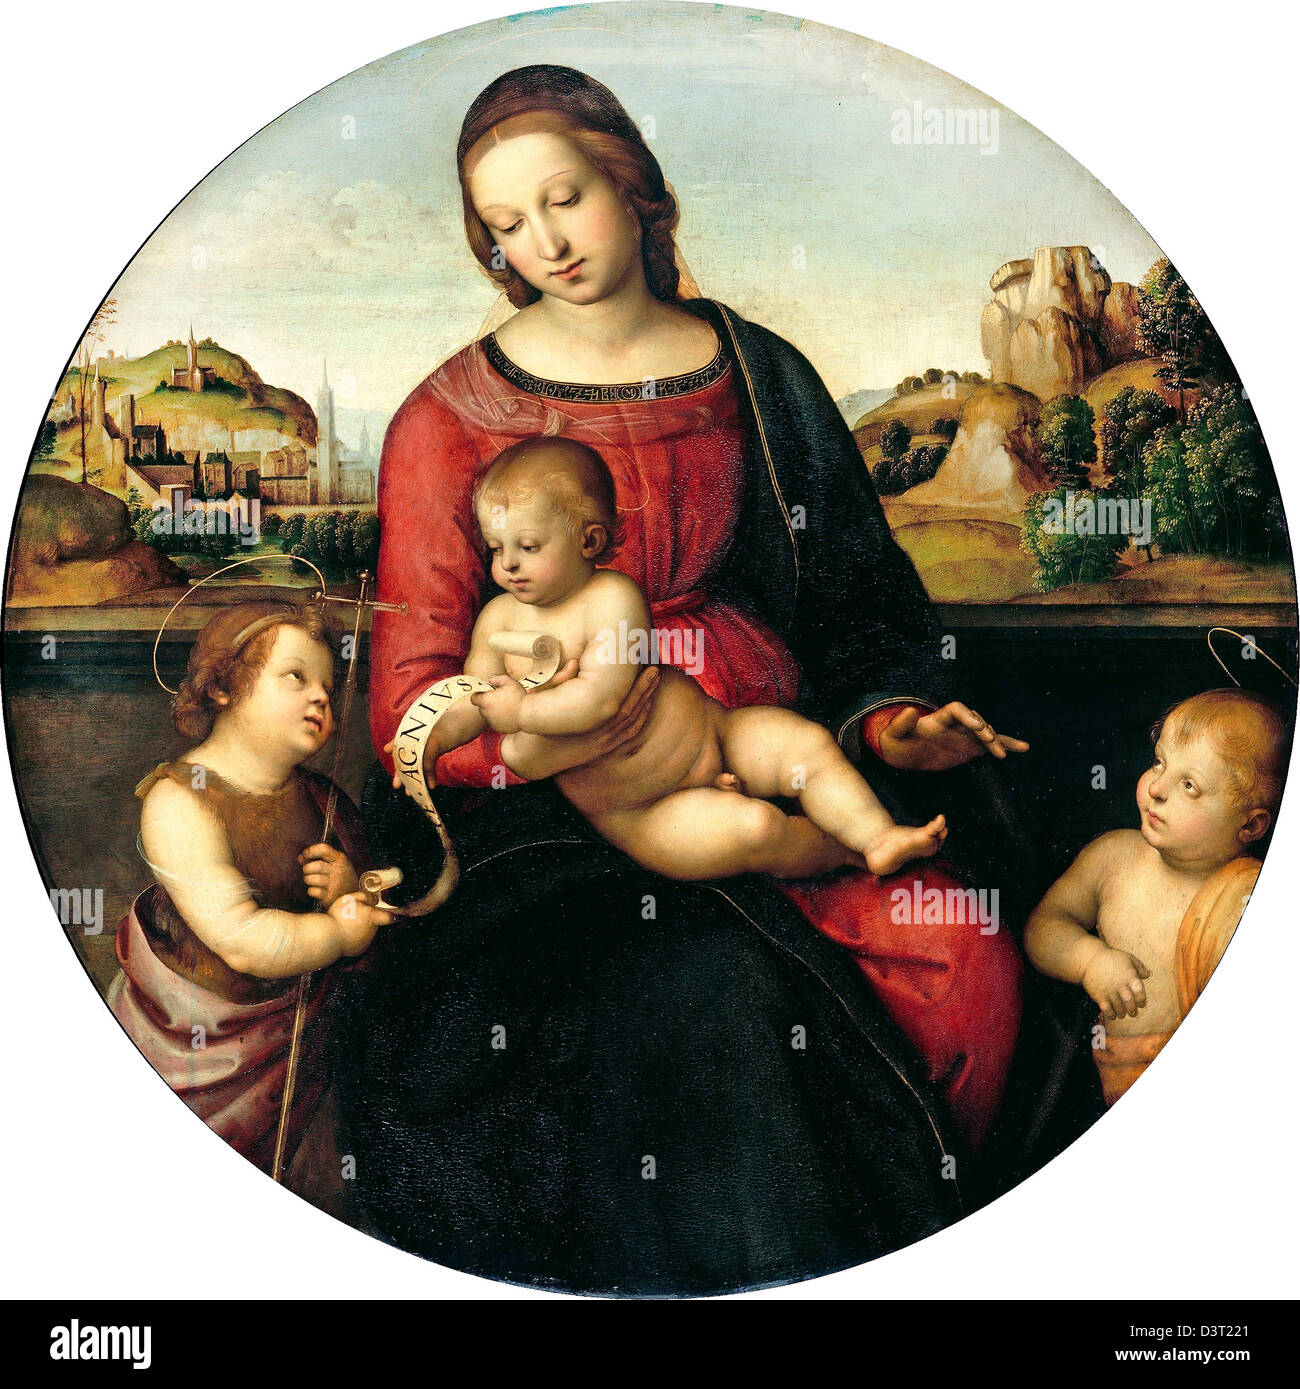 Raphael, Mary with the Child, John the Baptist and a Holy Boy (Madonna Terrranuova) 1505 Oil on wood. Gemaldegalerie, Berlin Stock Photo